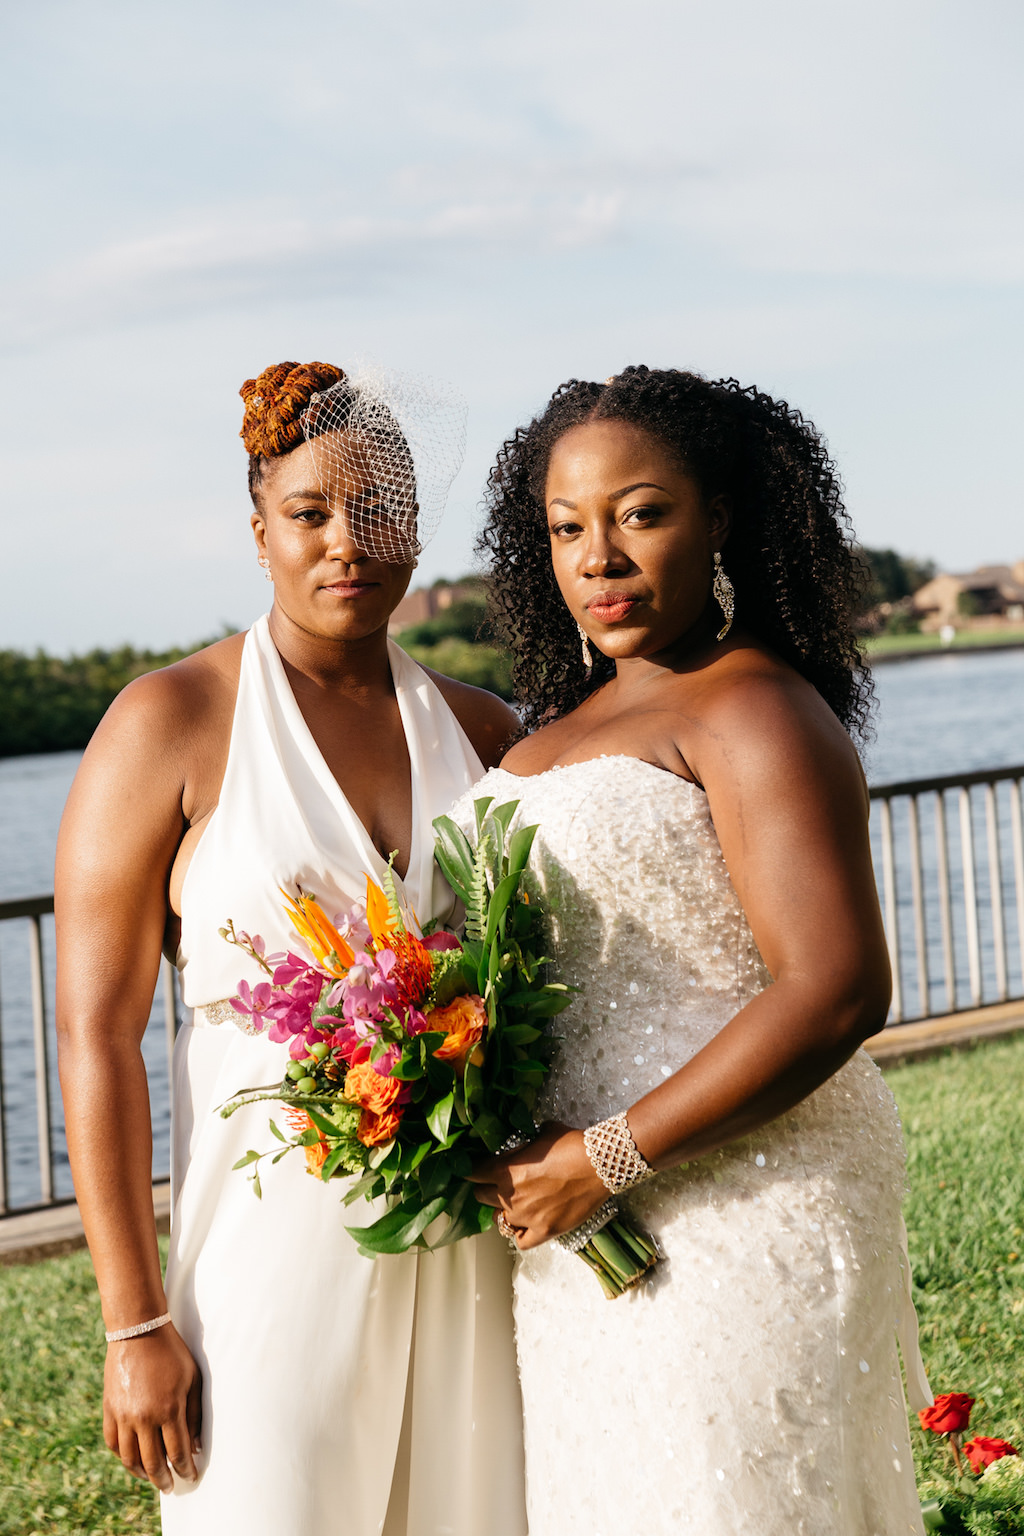 Outdoor Waterfront Wedding Portrait, Bride in Halter BHDLN Pantsuit with Birdcage Veil and Beaded Strapless David's Bridal Dress with Pink, Orange and Red Floral with Tropical Greenery Bouquet | Tampa Waterfront Hotel Wedding Venue DoubleTree Suites by Hilton